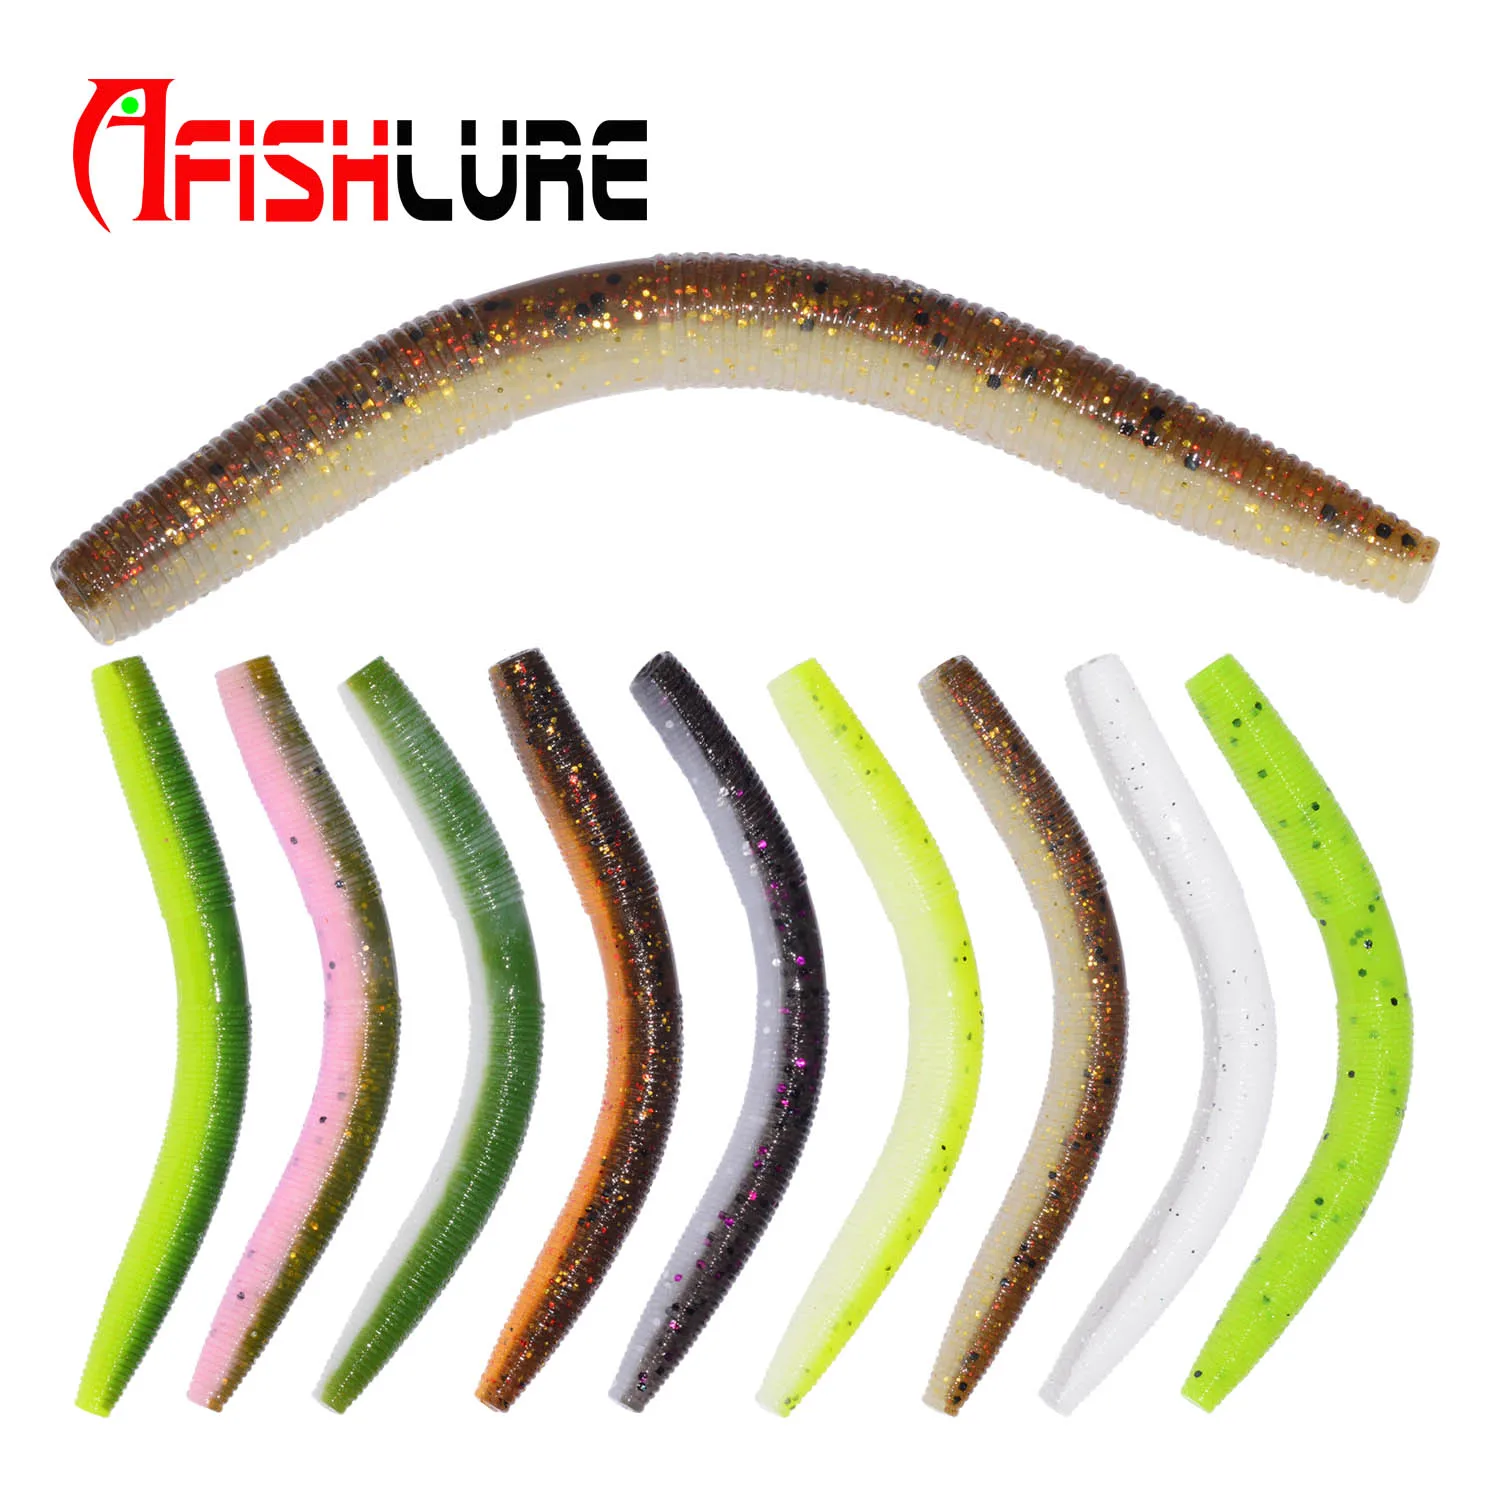 

Fishing Lure Stick Senko Worm 10cm 6.5g 8pcs AR24 2.5 inch Bass Soft PVC Worm Lures Baits Double Colors Earthworm for Wracky Rig, 8 colors for choice